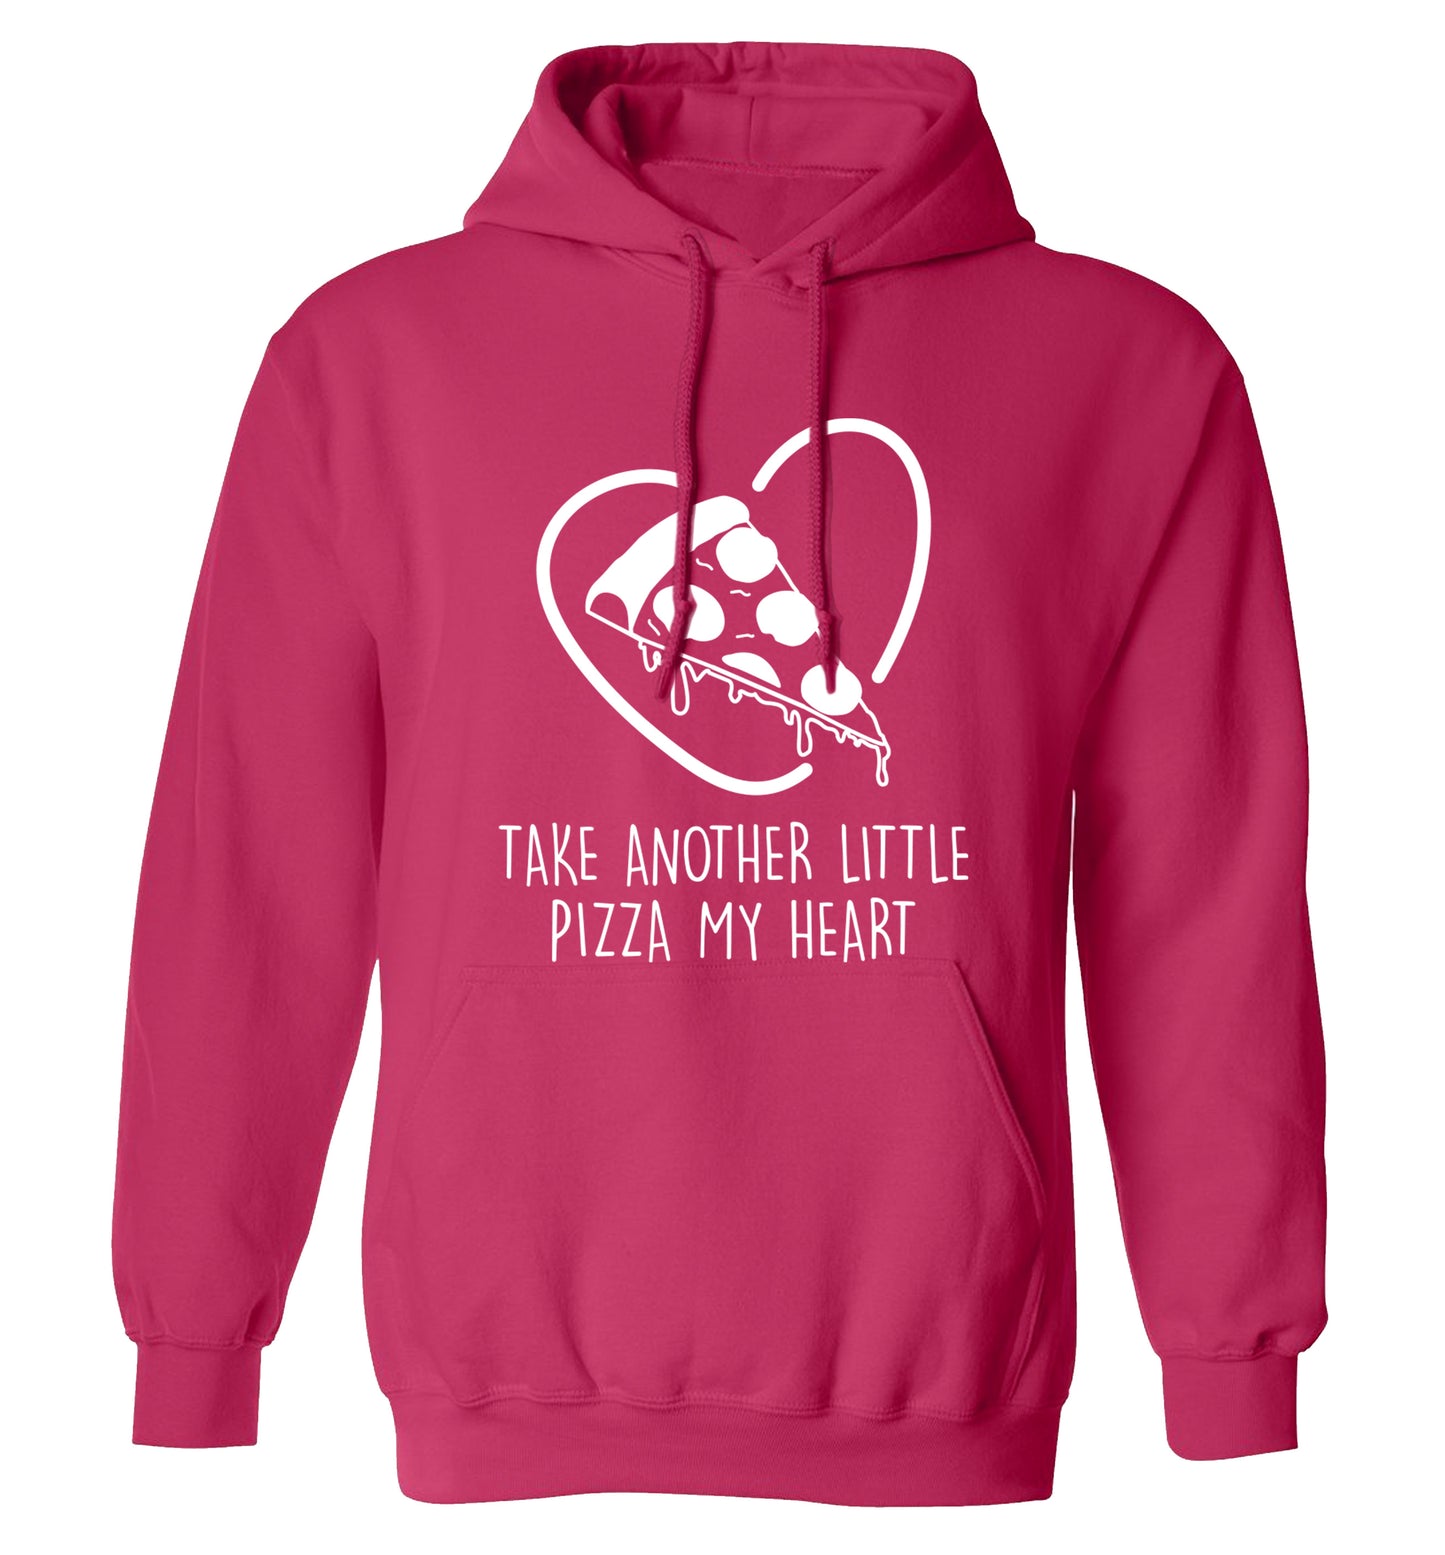 Take another little pizza my heart adults unisex pink hoodie 2XL